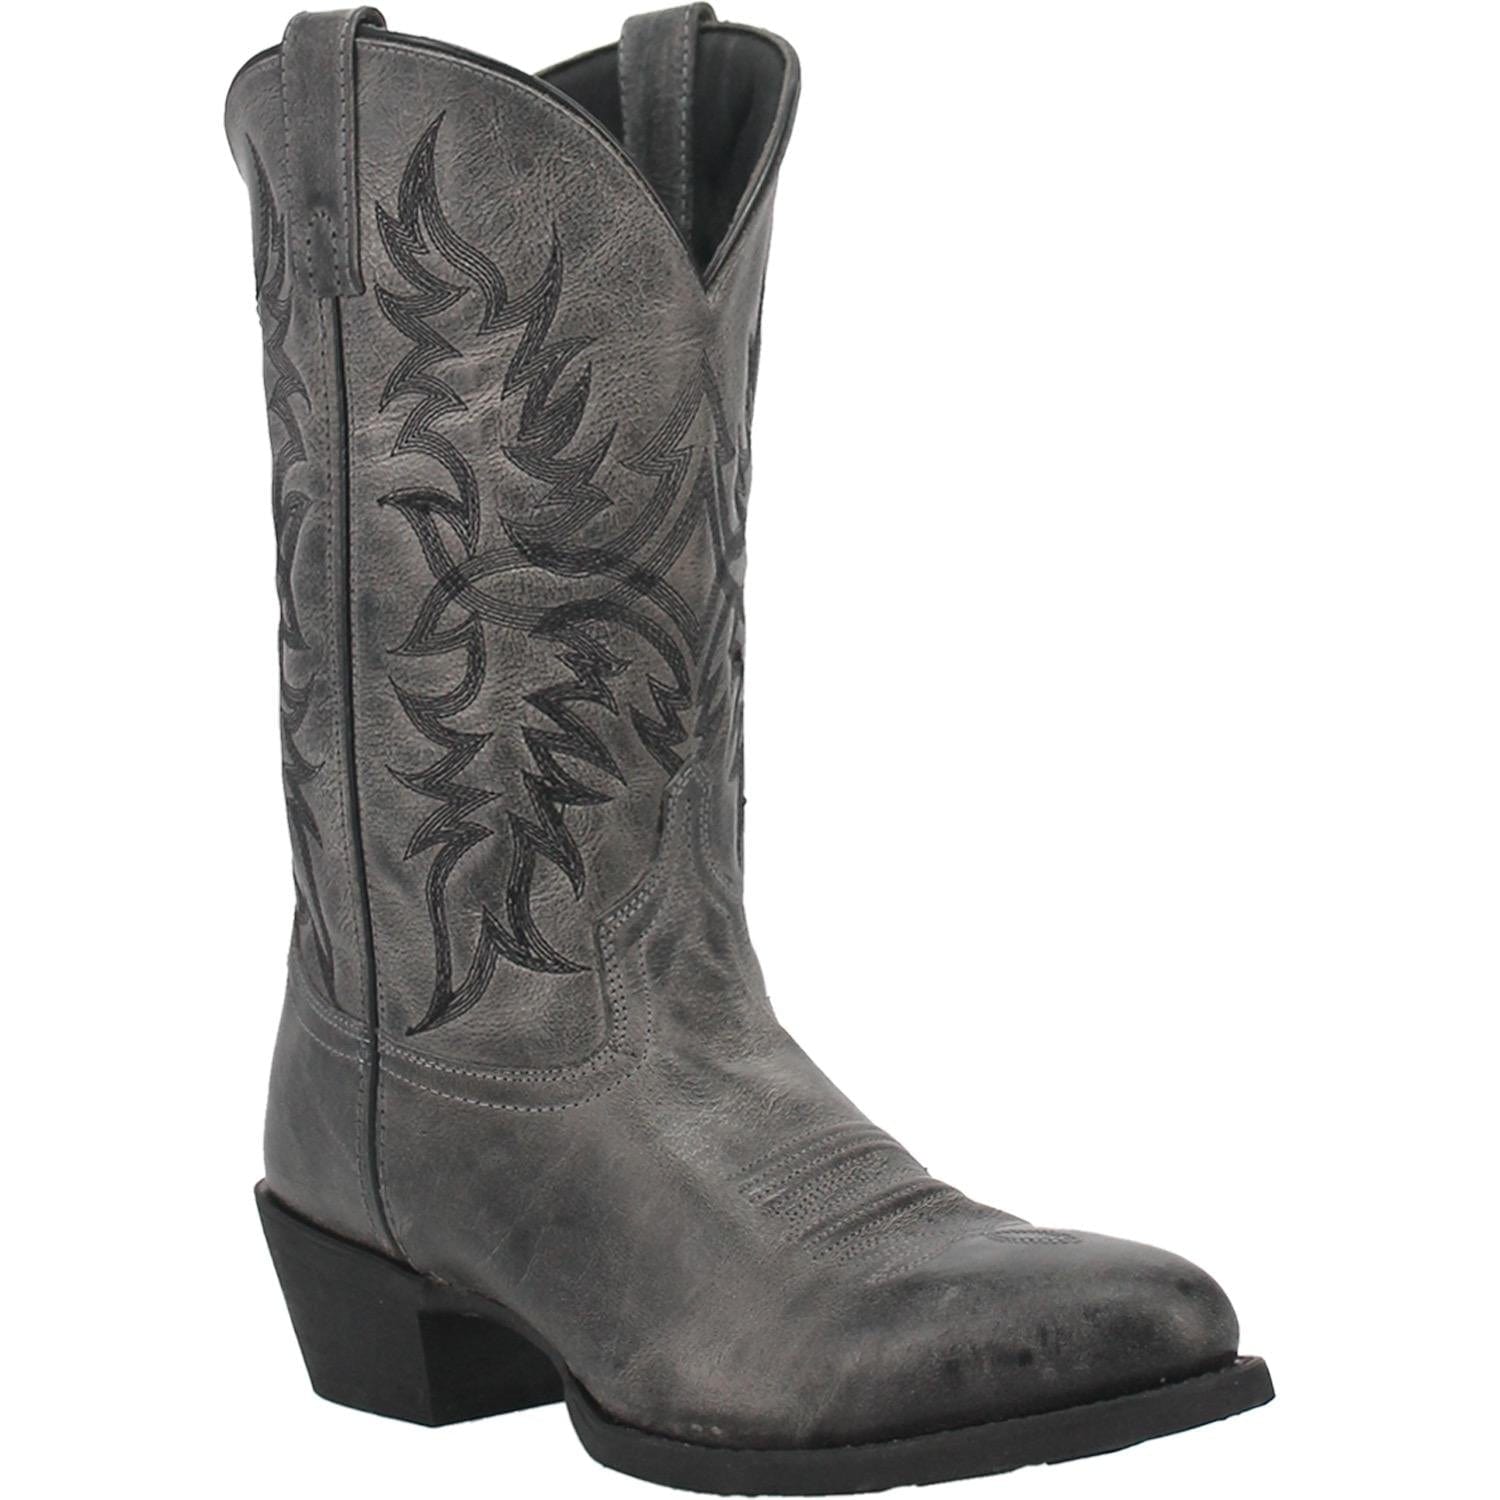 Shop Mens Western Cowboy & Work Boots Page 9 - Russell's Western Wear, Inc.